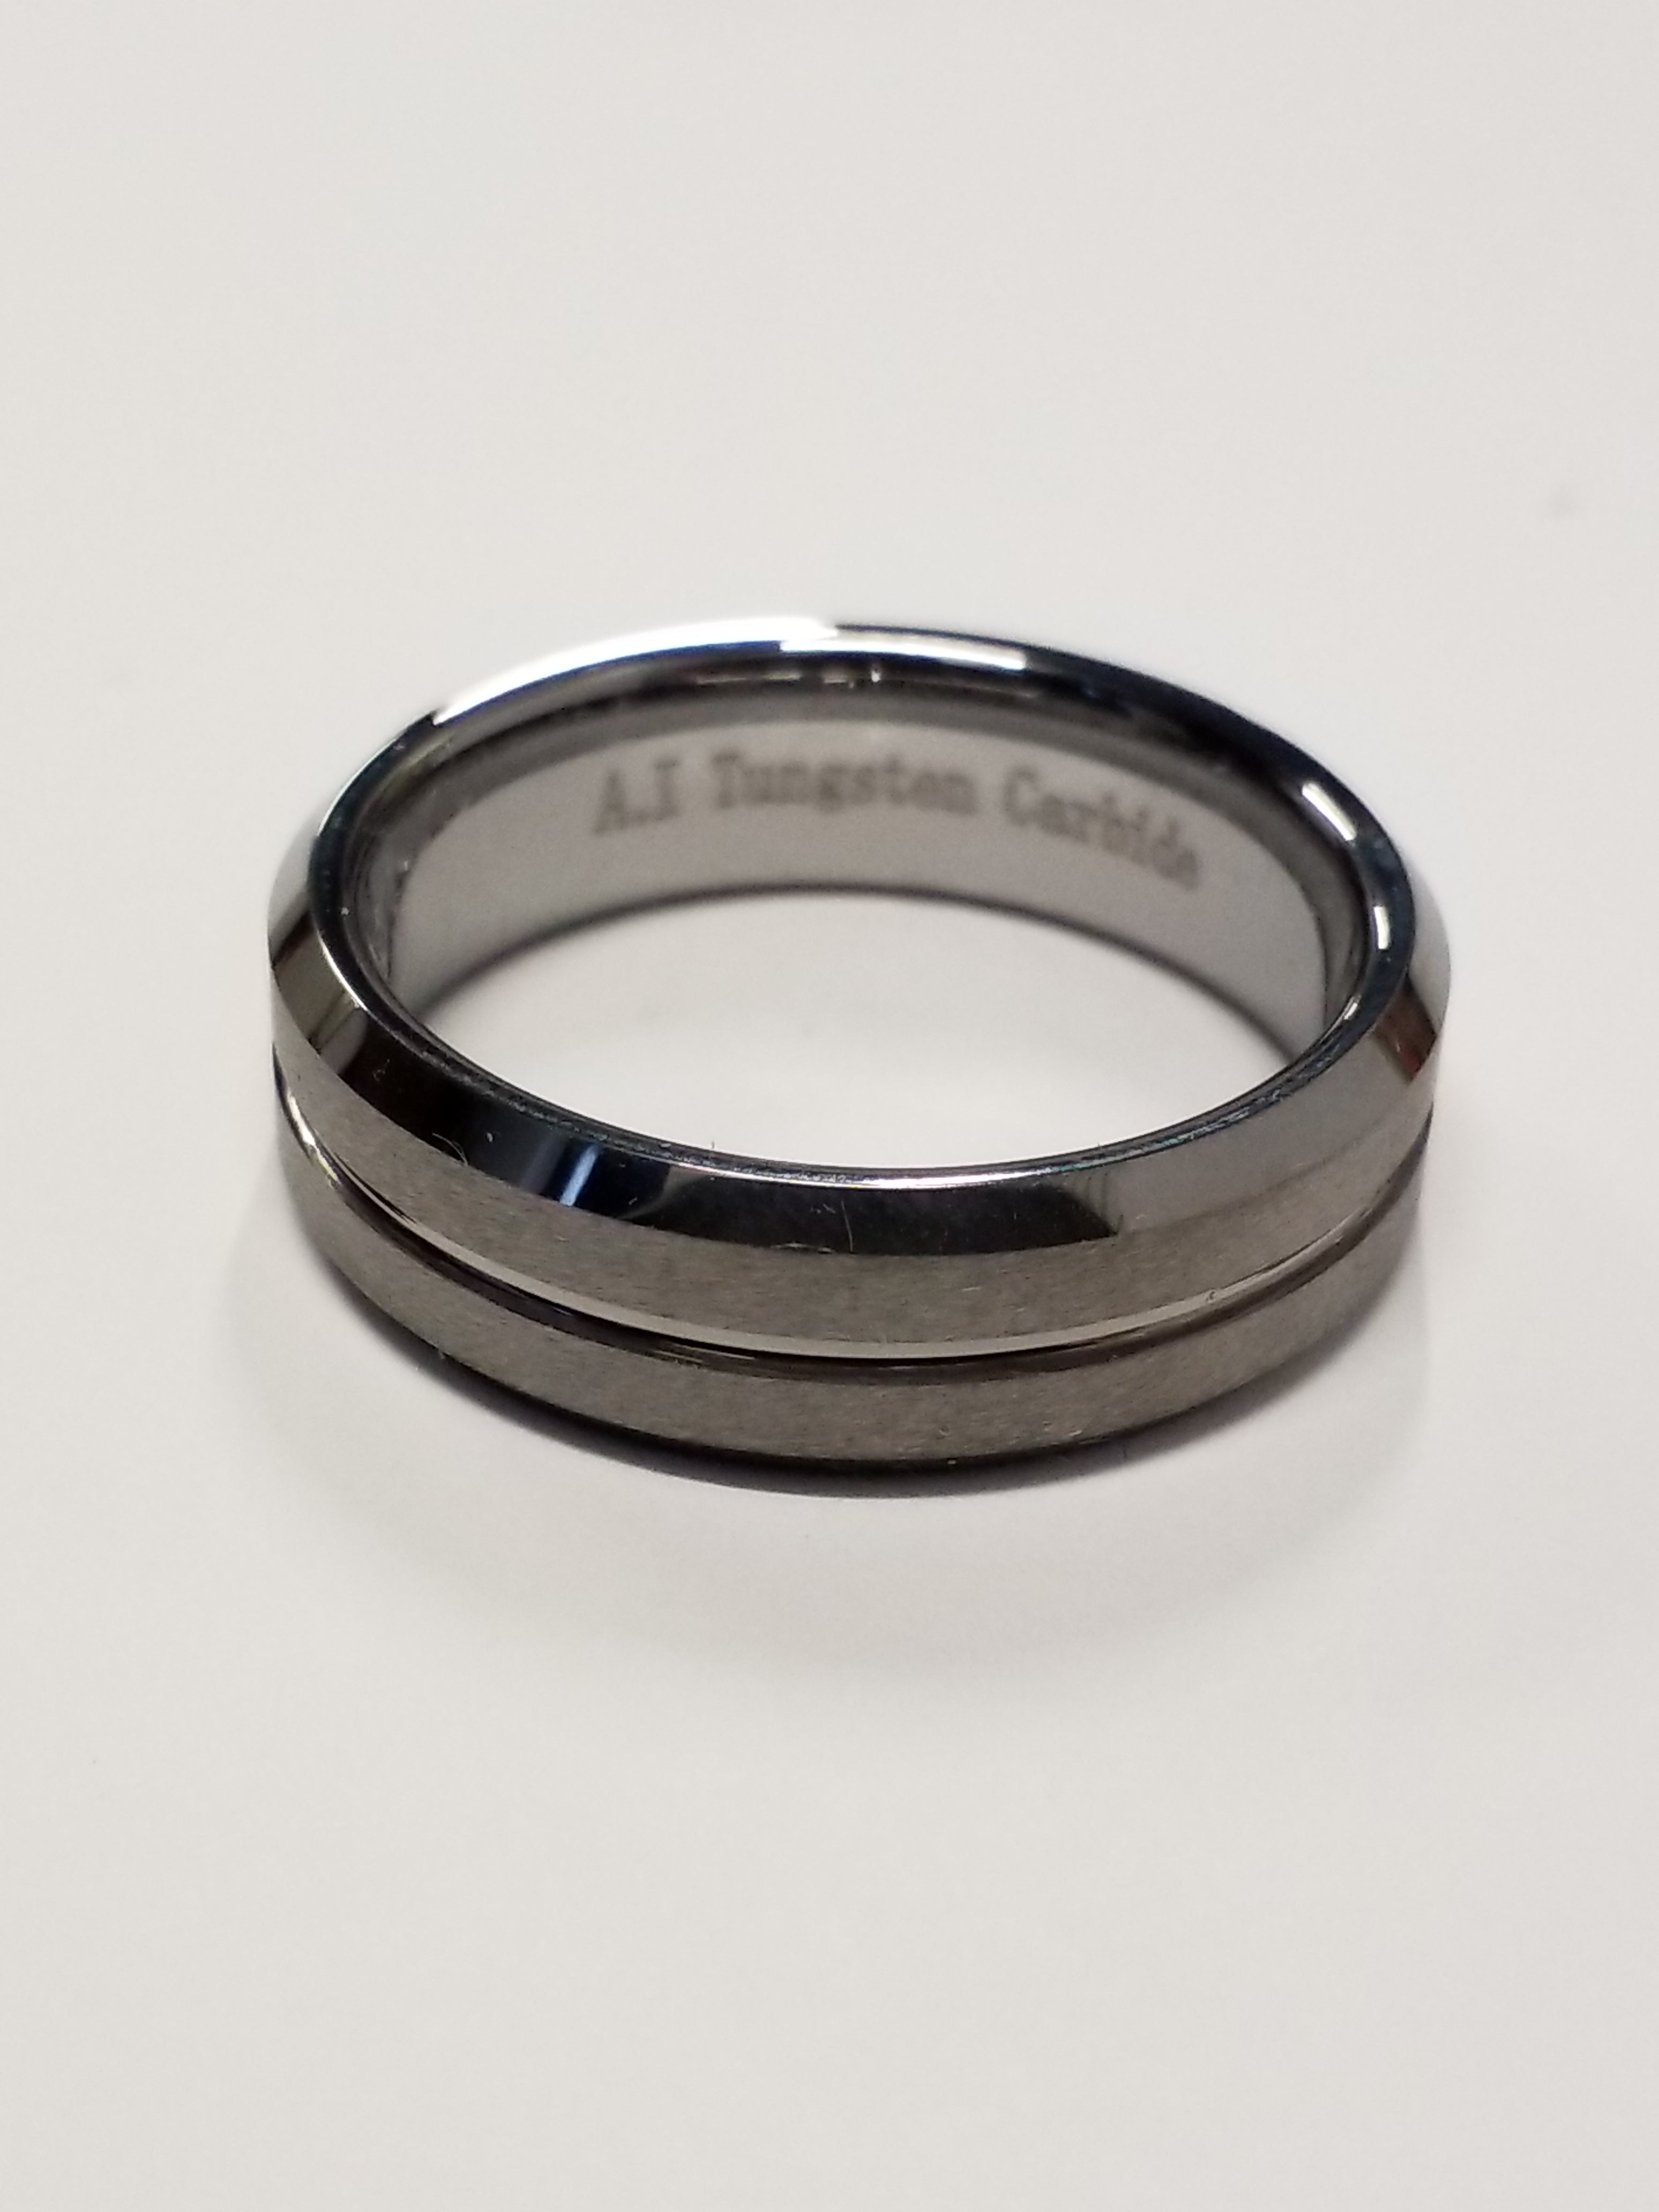 Tungsten Carbide Band TUR17 - Size 11 (Sizes 5 through 15 can be ordered)